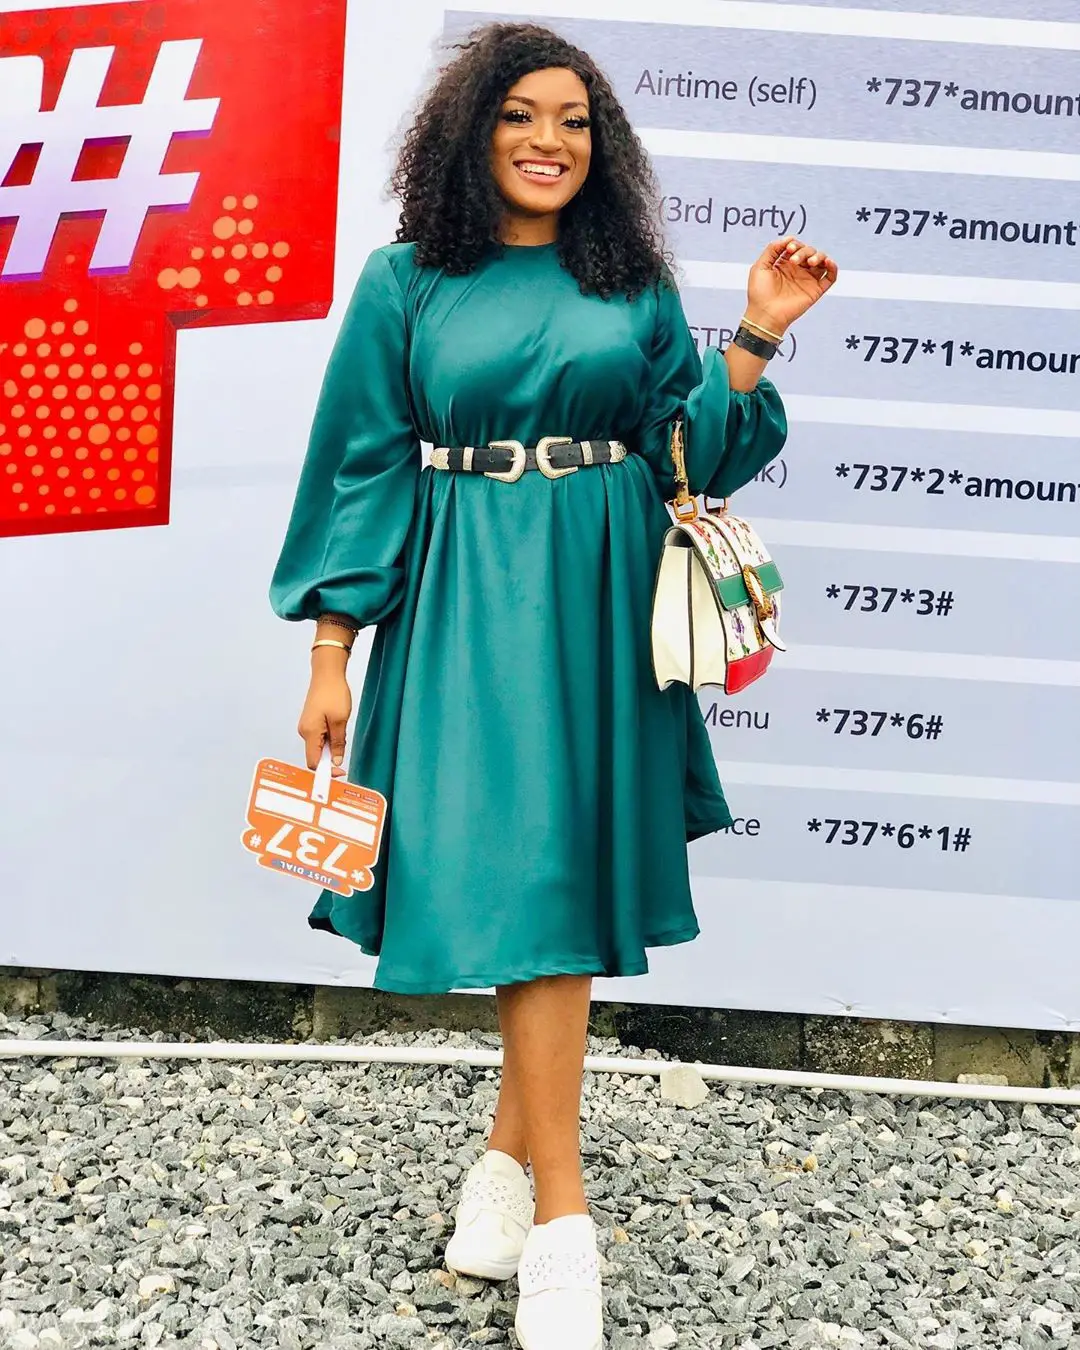 Here Are Some Street Styles At Day 1 Of The GTBank Fashion Weekend